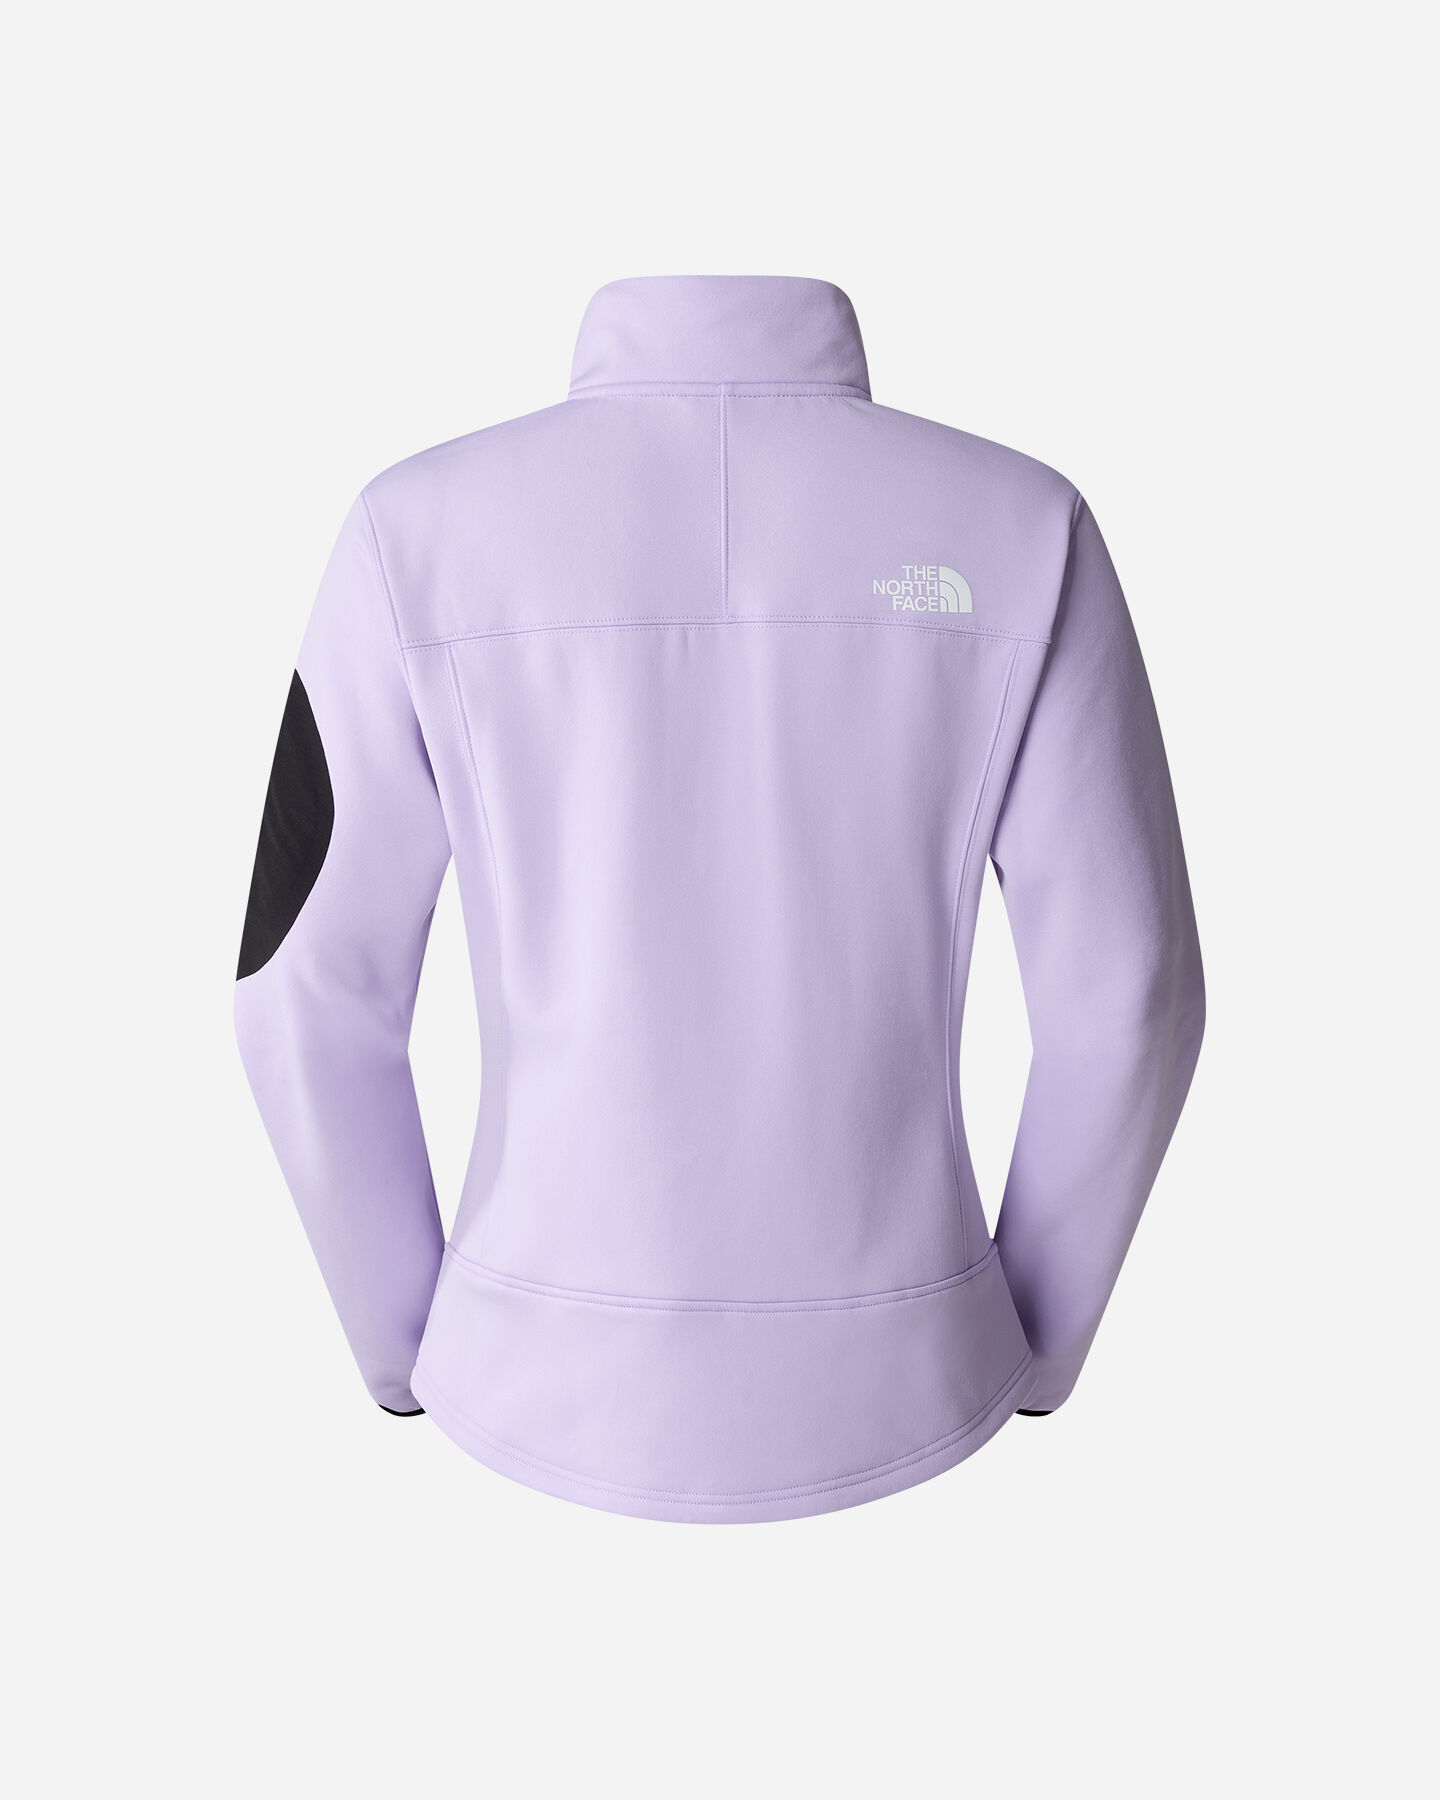  Pile THE NORTH FACE MISTYESCAPE W S5650896|WI2|XS scatto 1